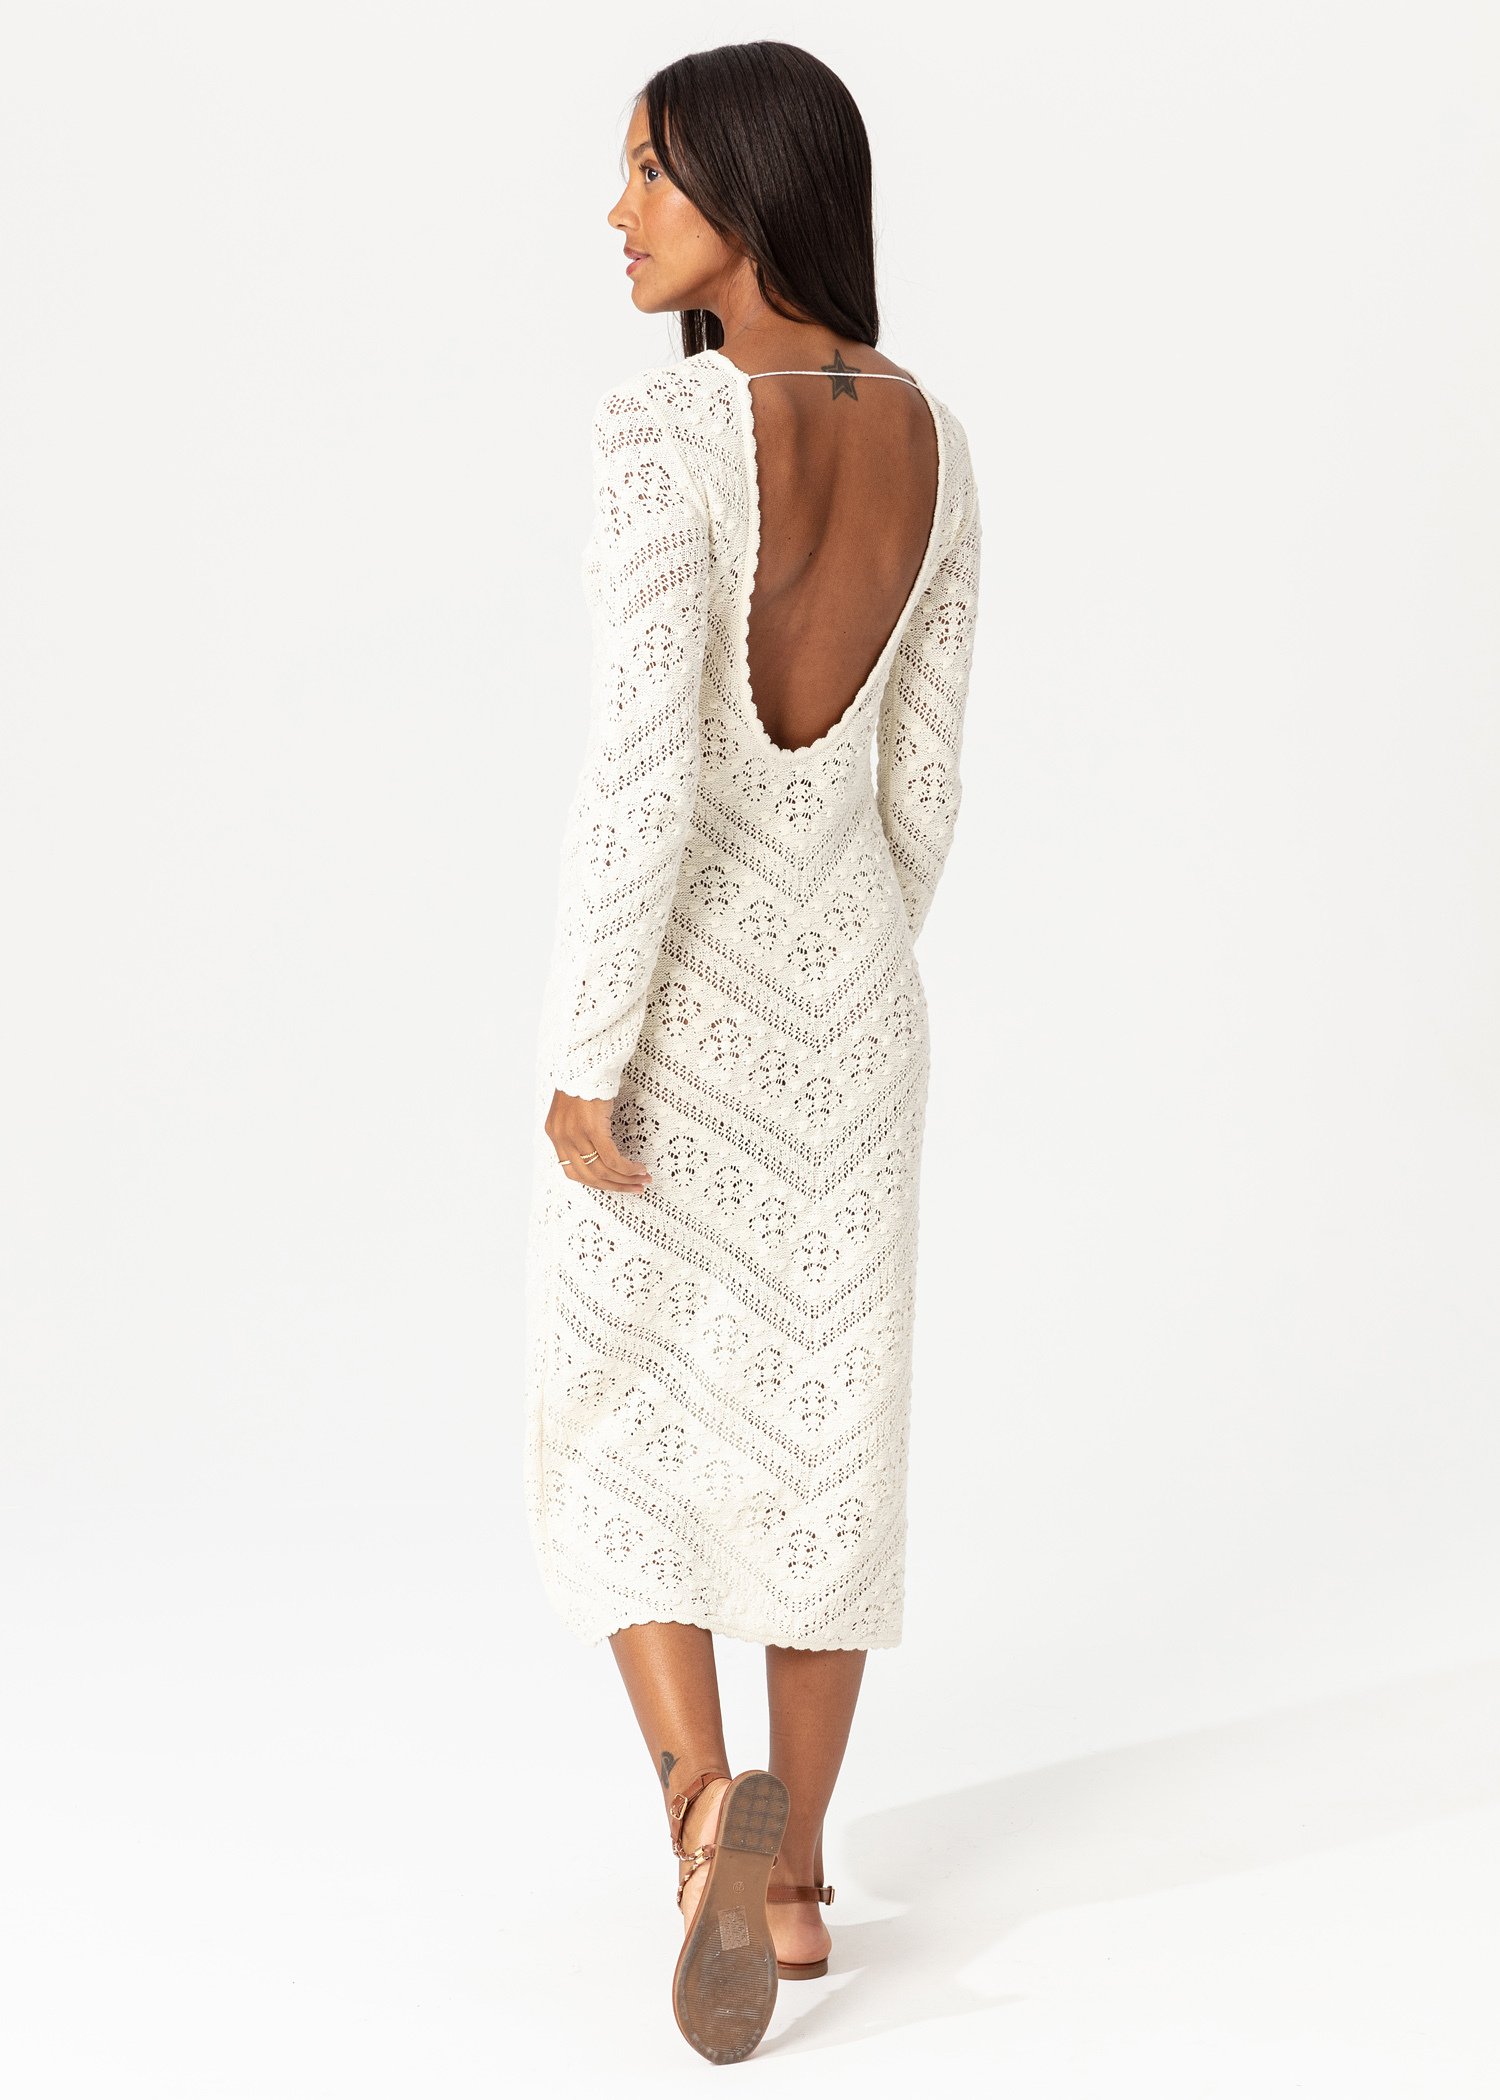 Knitted dress with open back